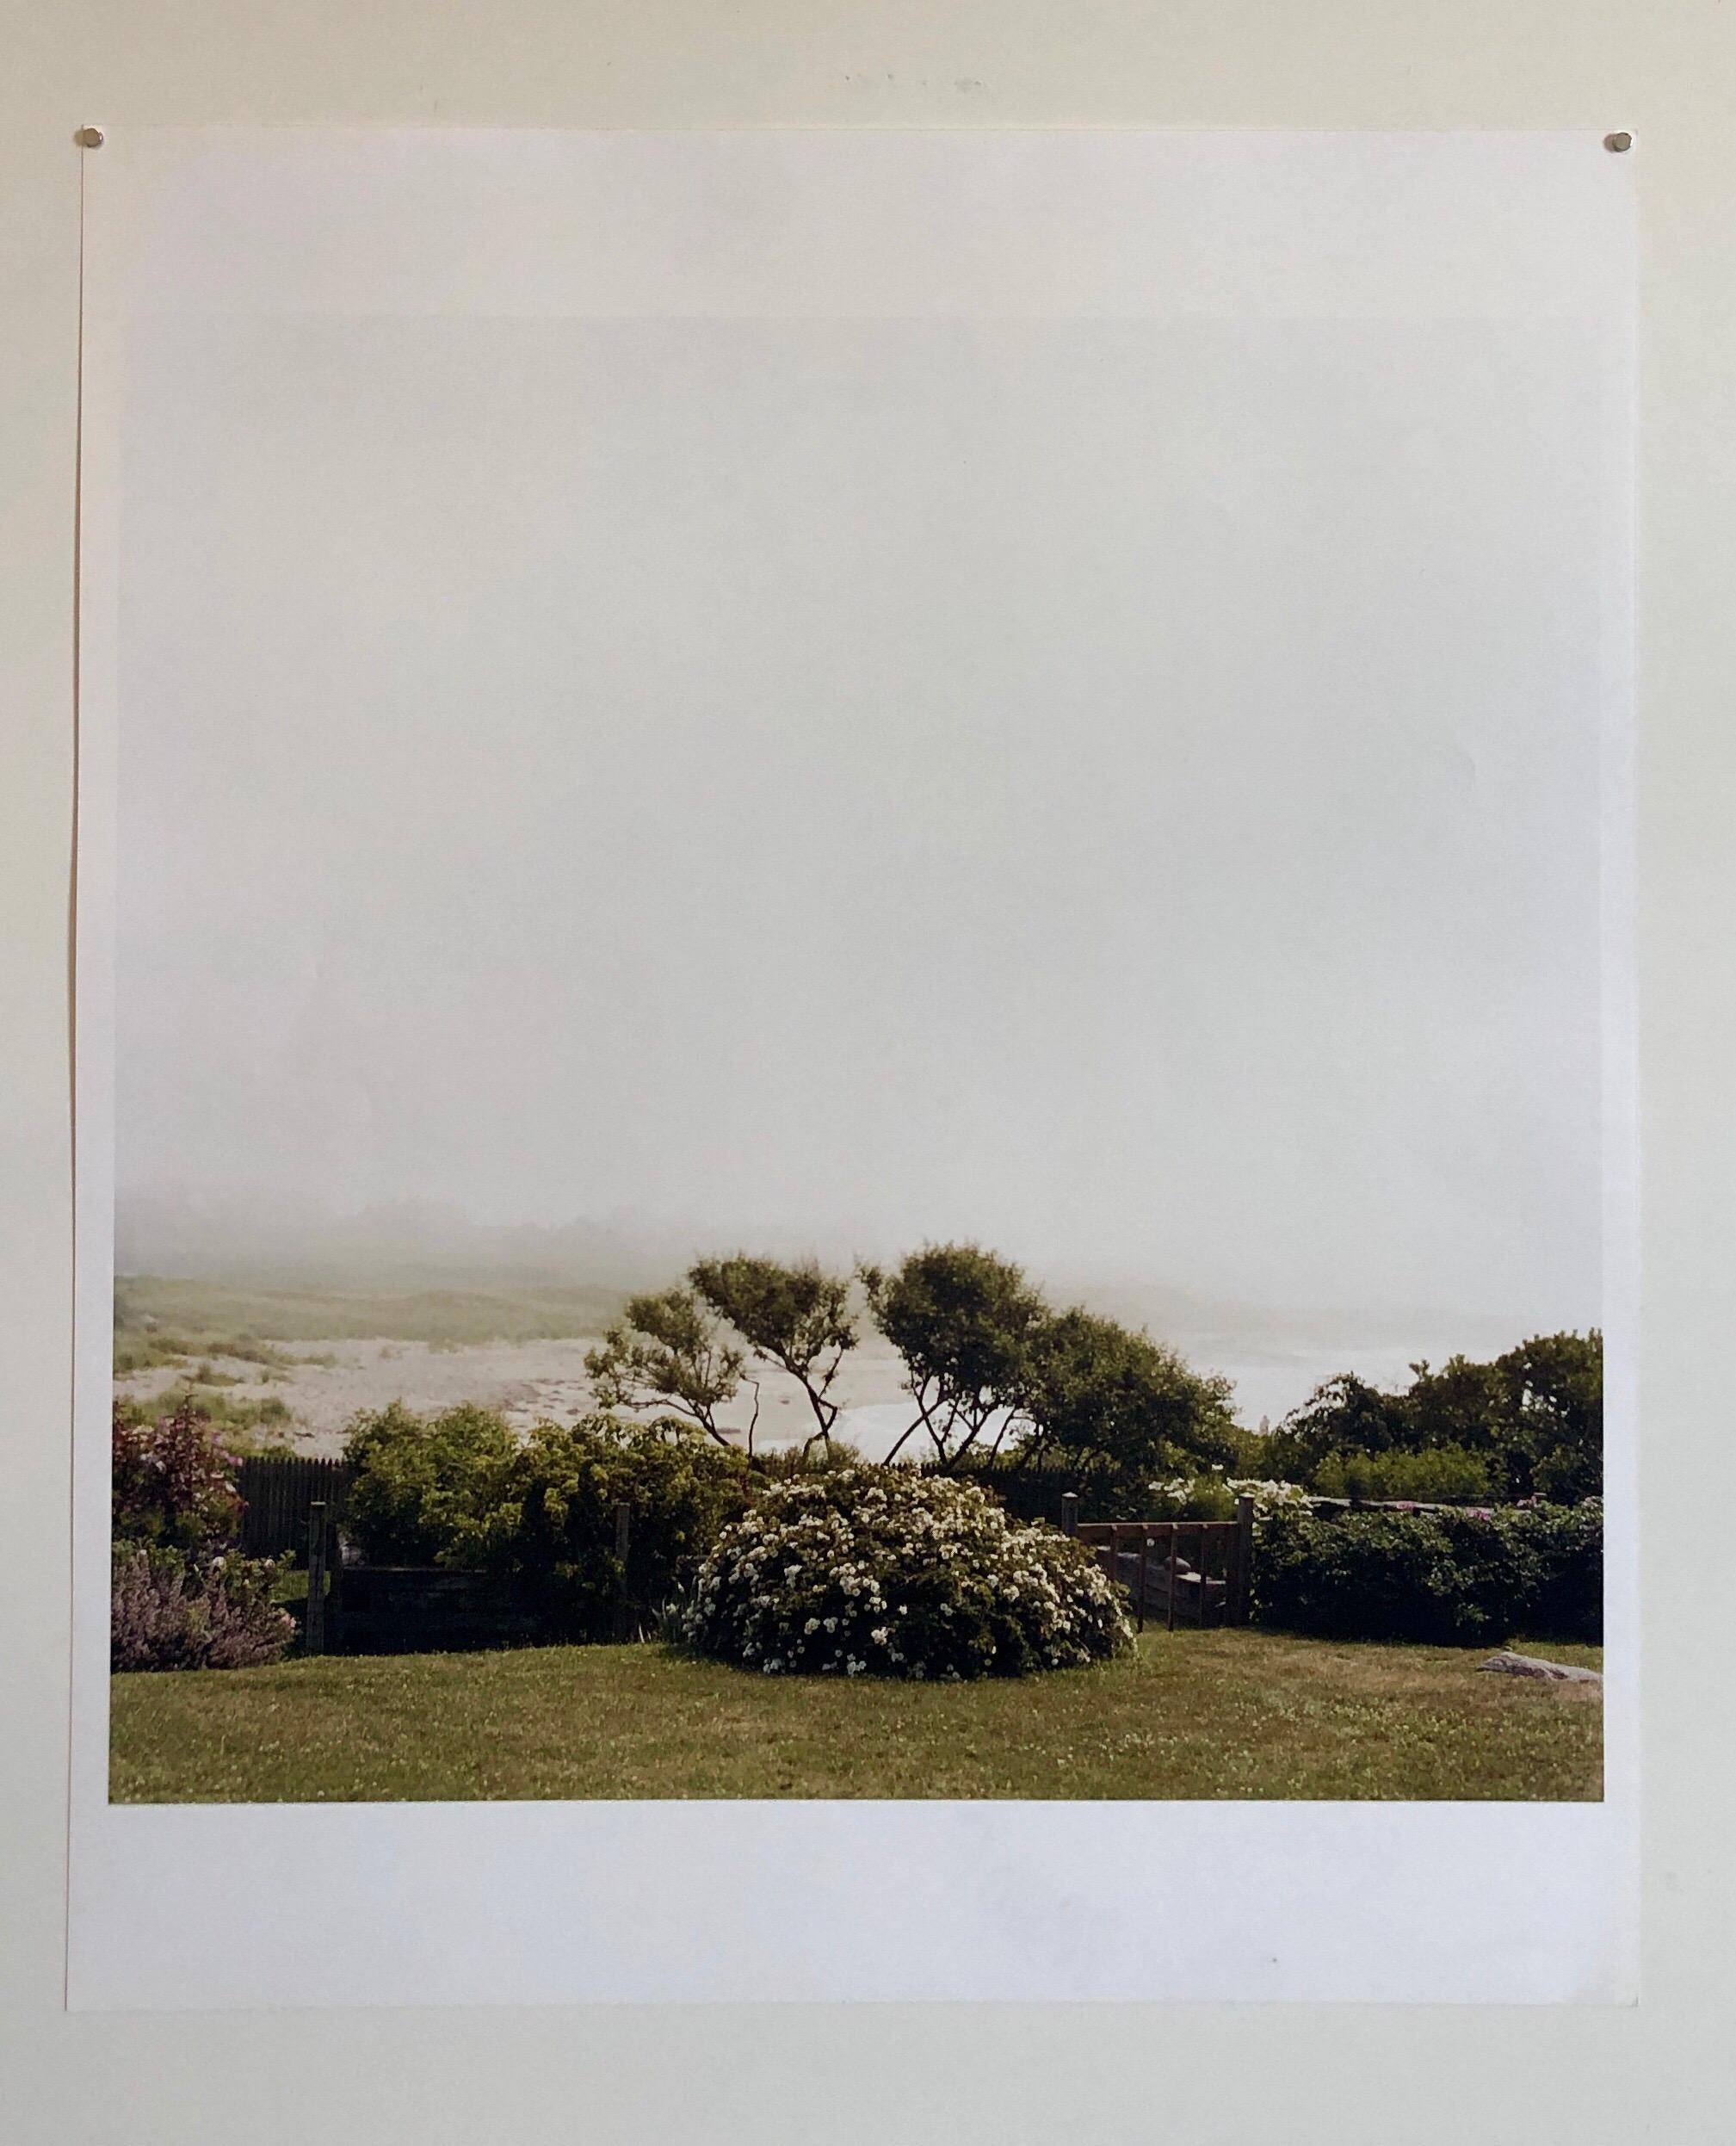 Wild Roses , Photo, The Tappen House, Little Compton, RI (Rhode Island). Hand signed and numbered. small edition of 15, This one is marked proof. (these are on Kodak professional paper not Polaroid 20X24)
Moody photos of a summer vacation house at